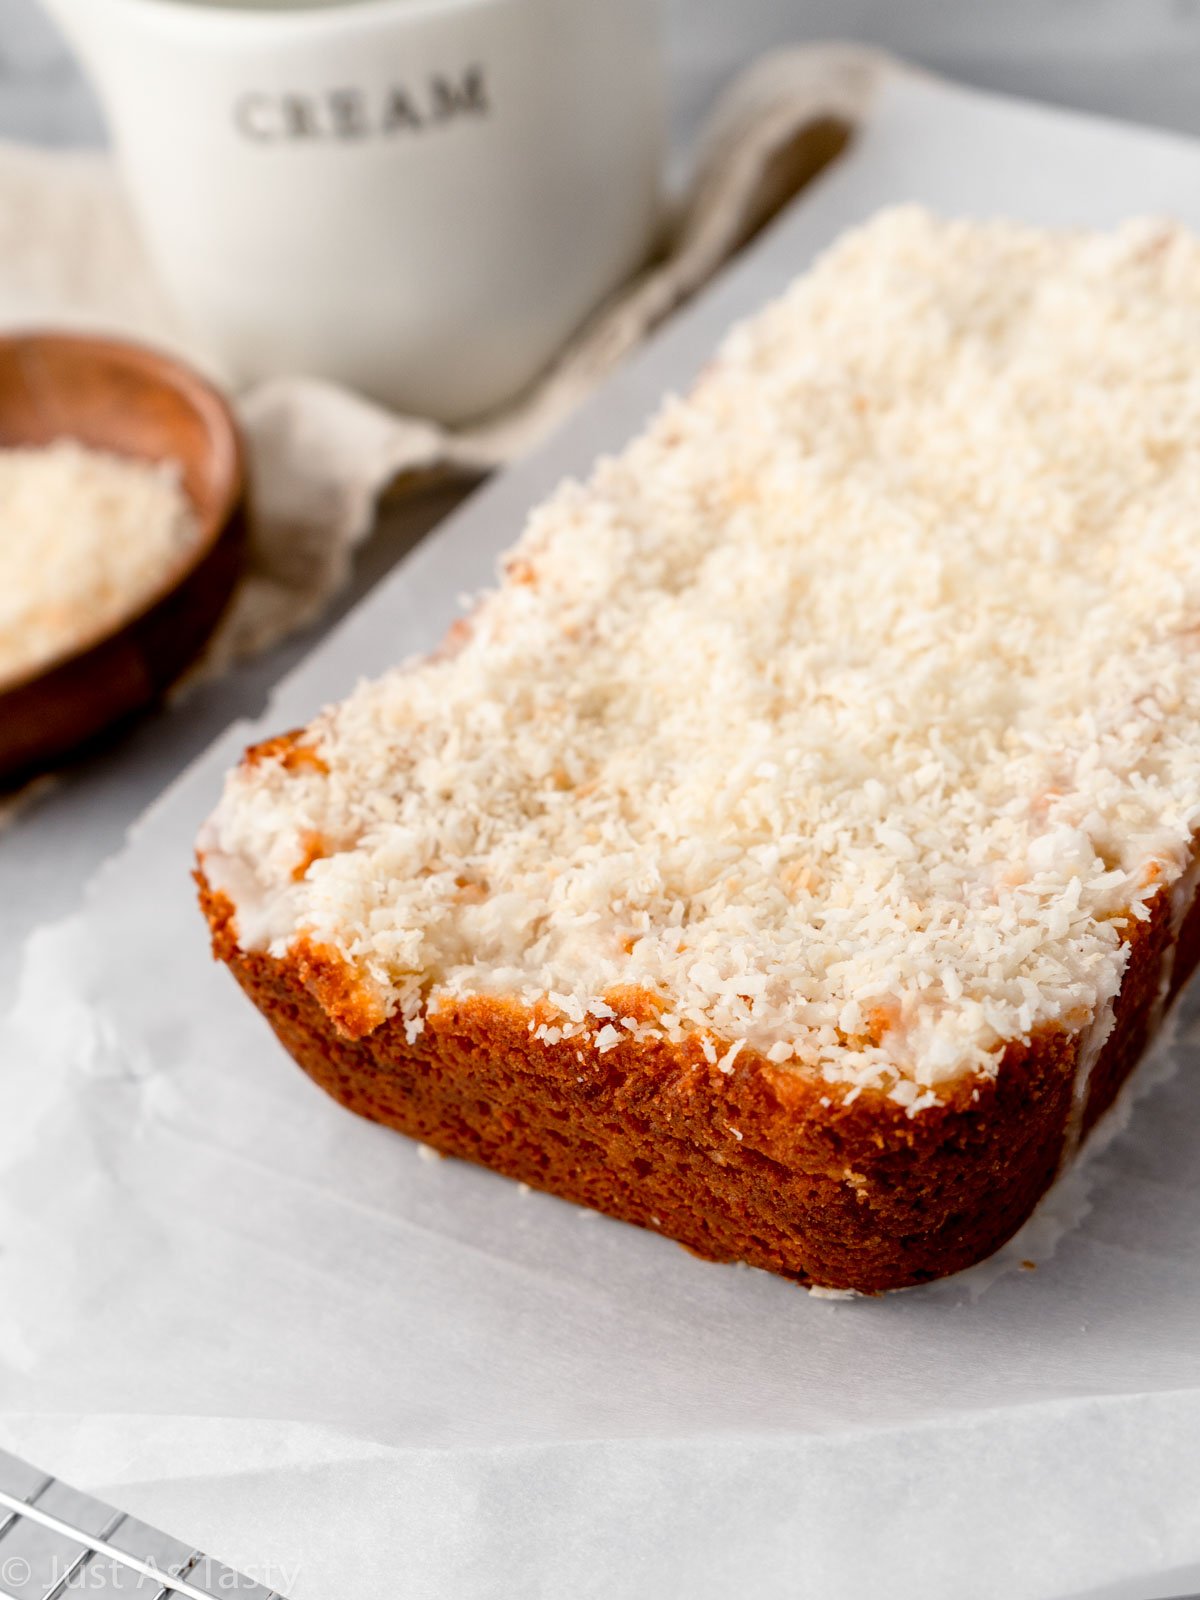 Loaf cake topped with icing and shredded coconut.